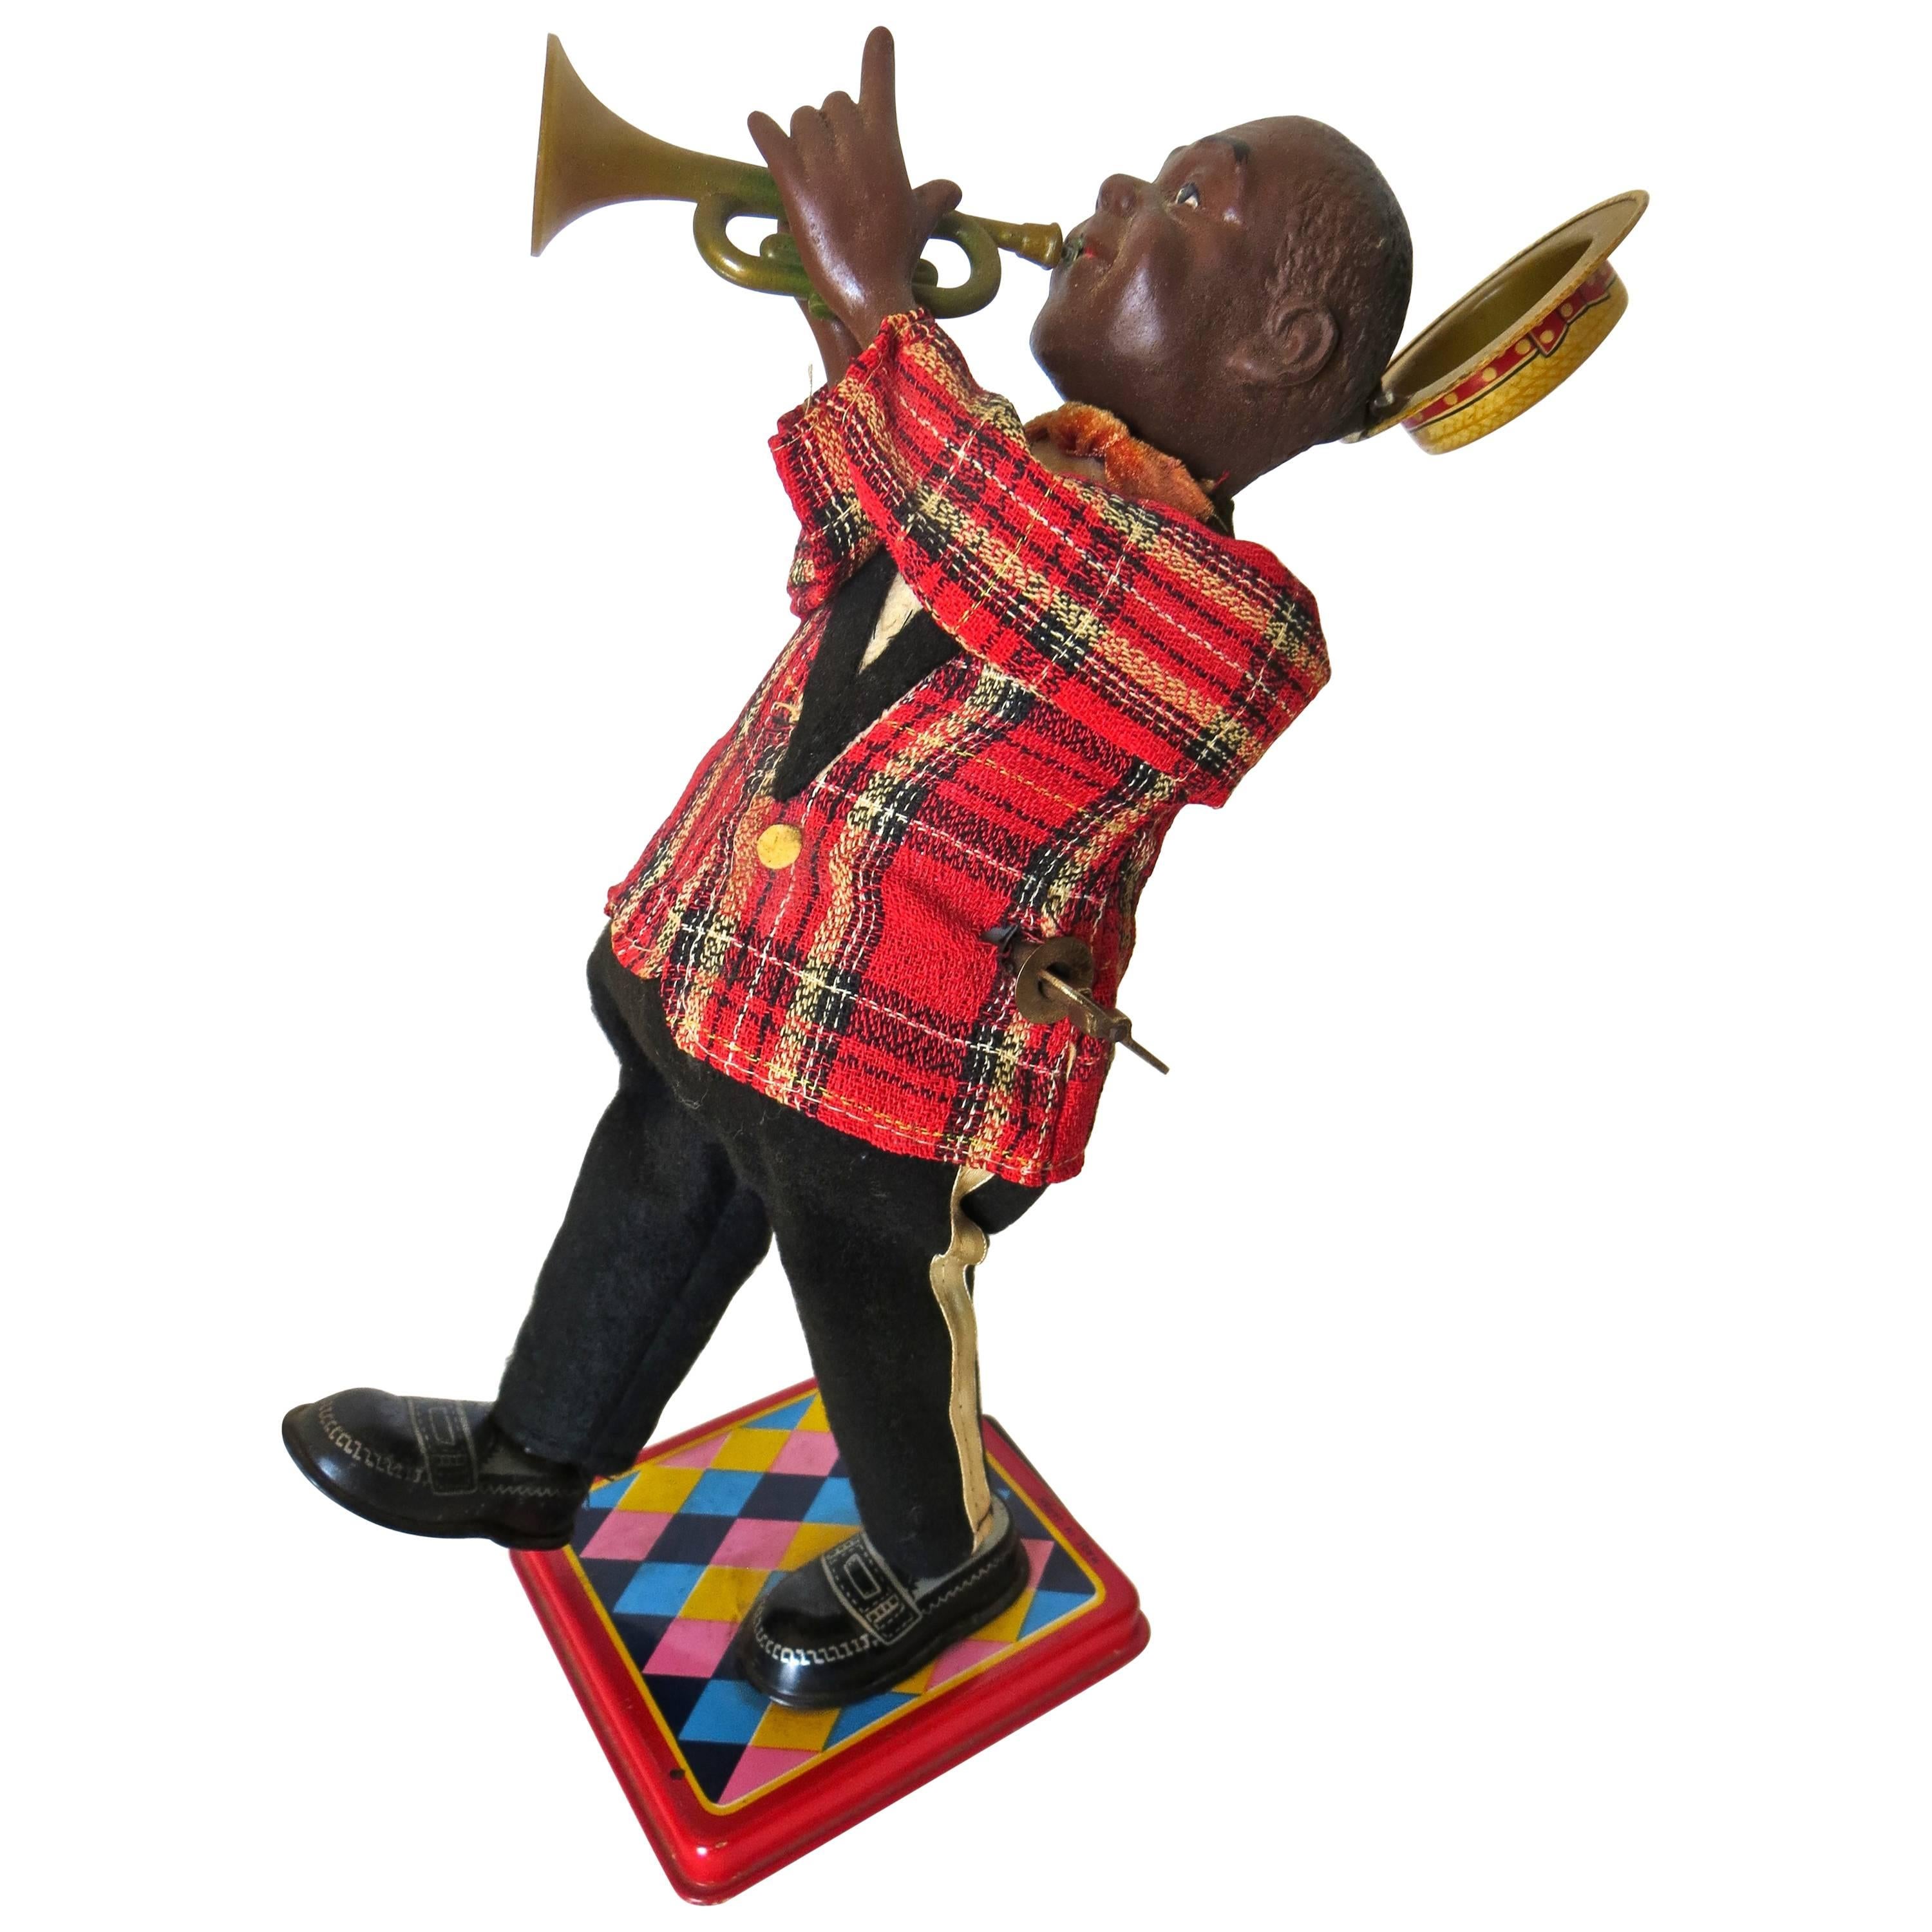 Louis Armstrong 'Satchmo' Wind Up Toy, American, circa 1950's